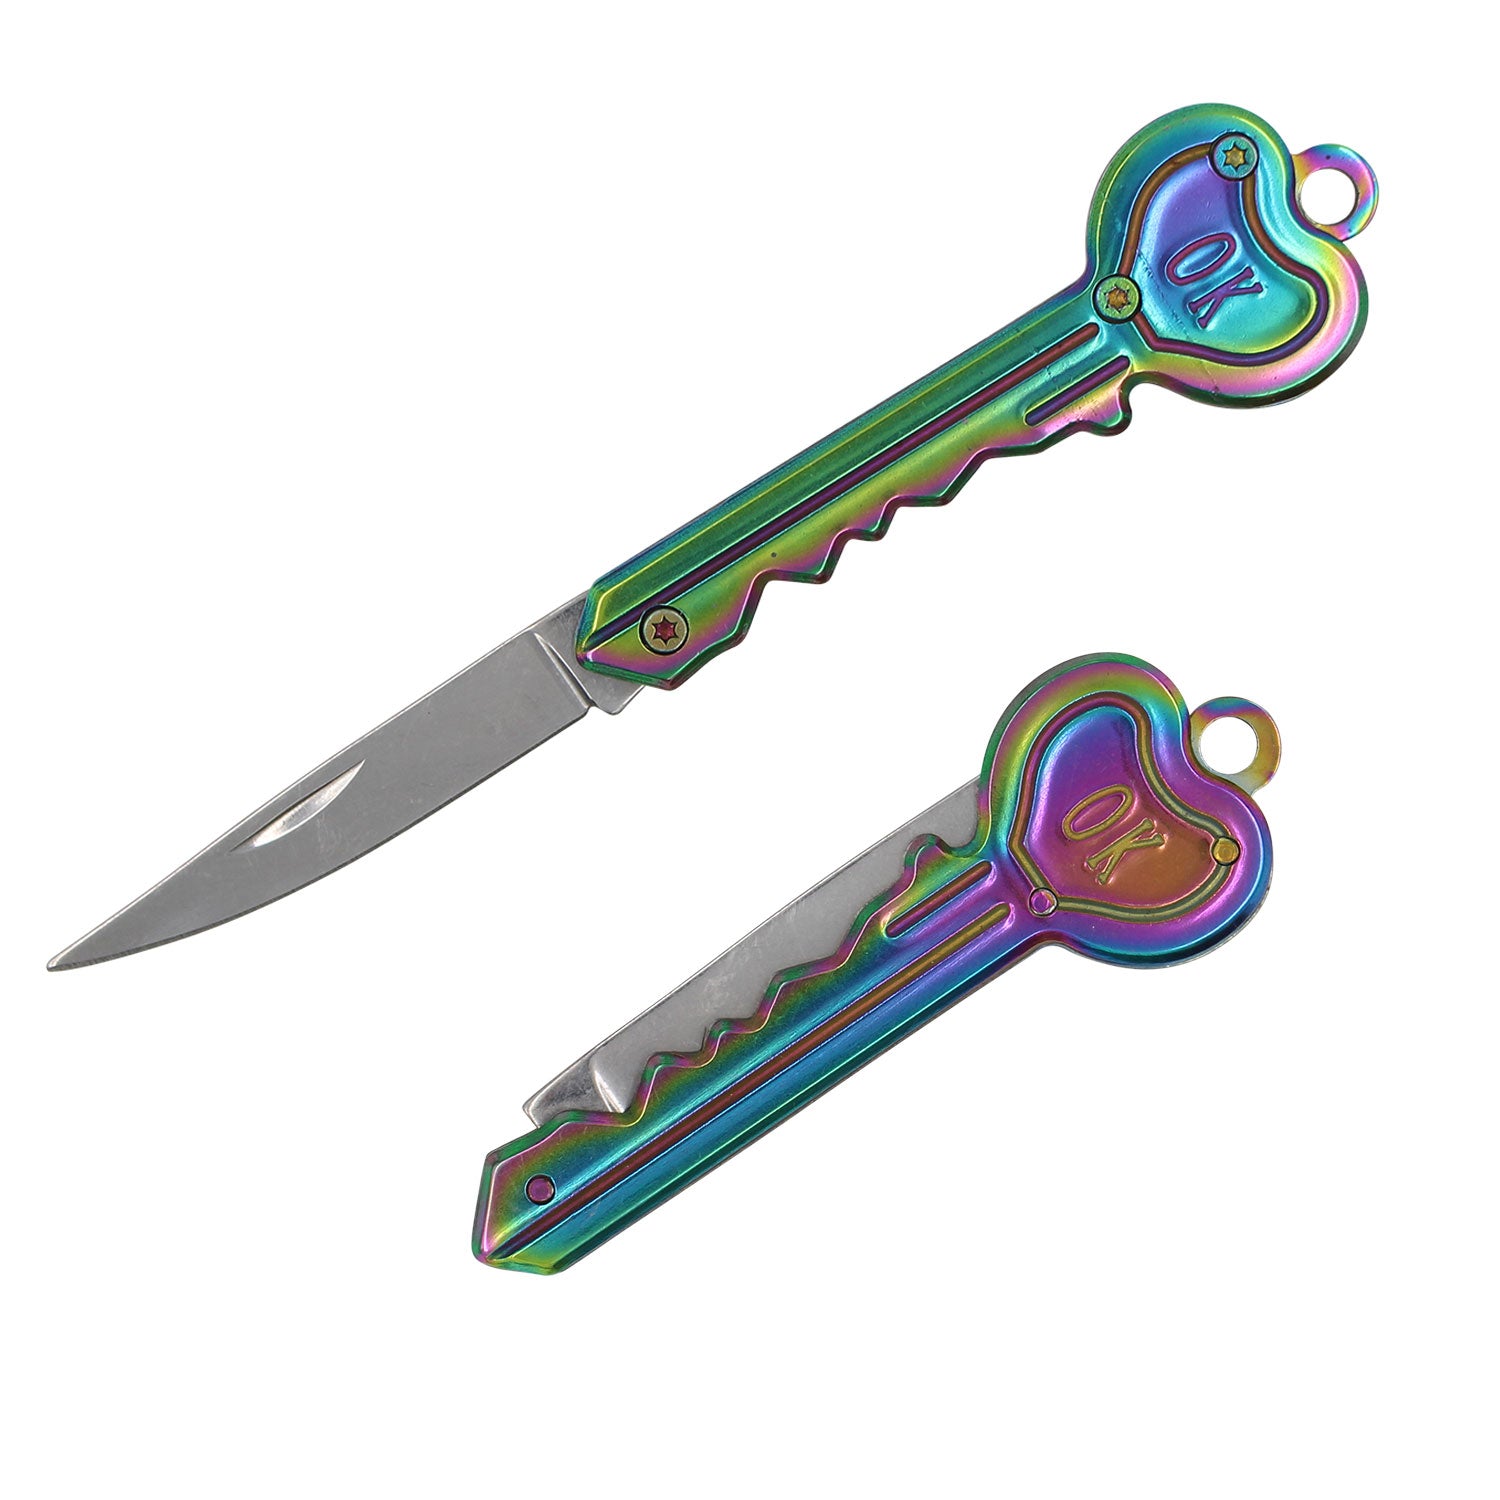 https://cdn.shopify.com/s/files/1/0780/8637/3678/products/knife-keychain-rainbow-real-sic.jpg?crop=center&height=1500&v=1690296964&width=1500